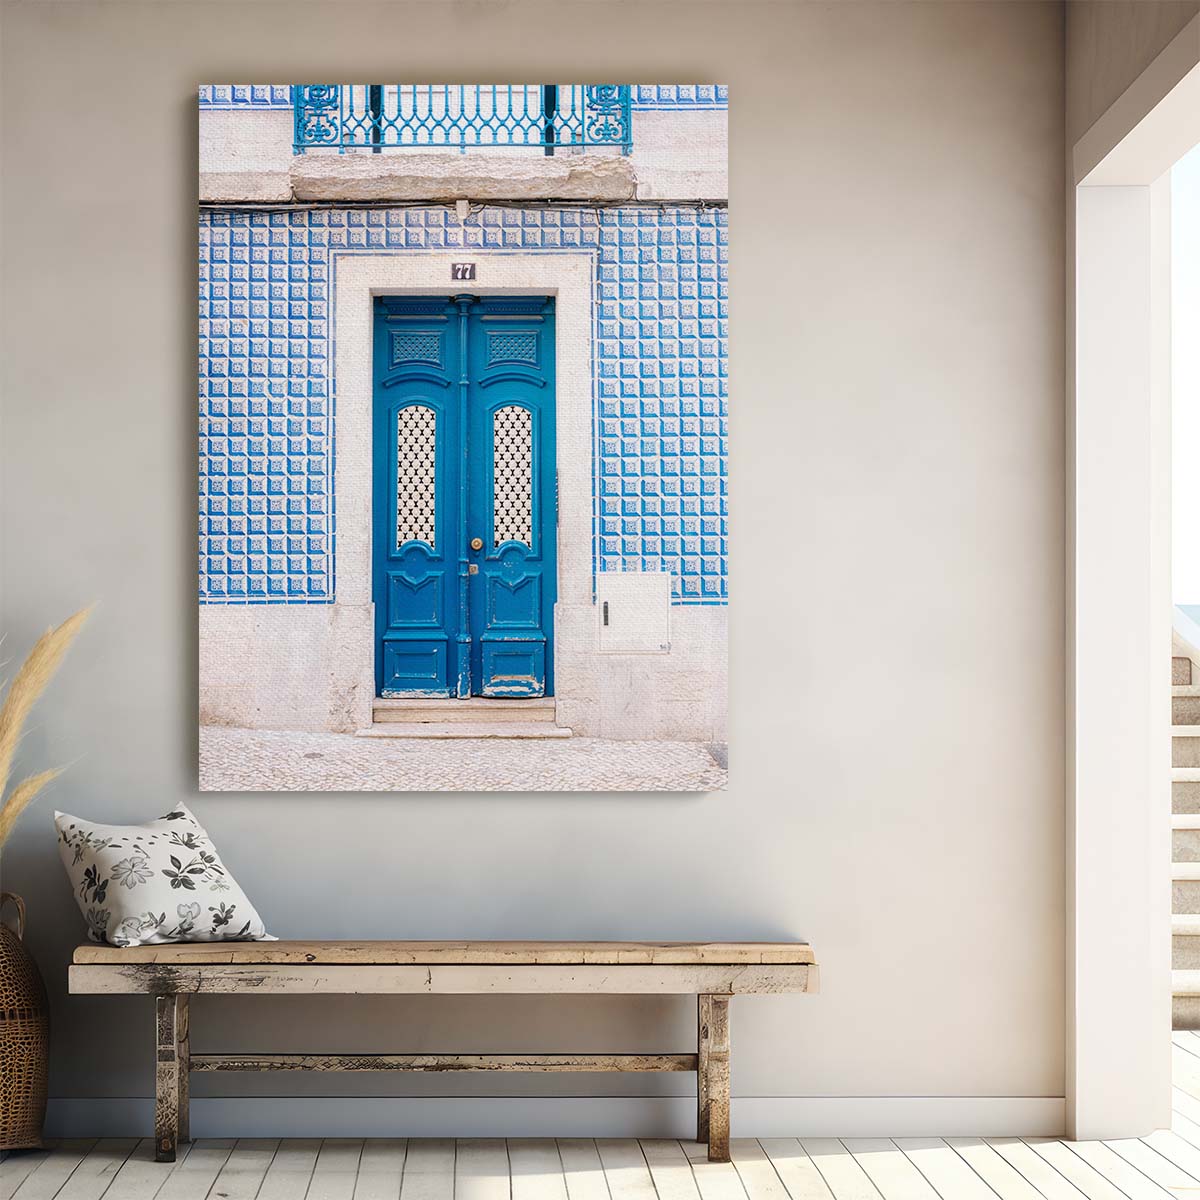 Lisbon, Portugal Blue Door Architecture Photography Wall Art by Luxuriance Designs, made in USA